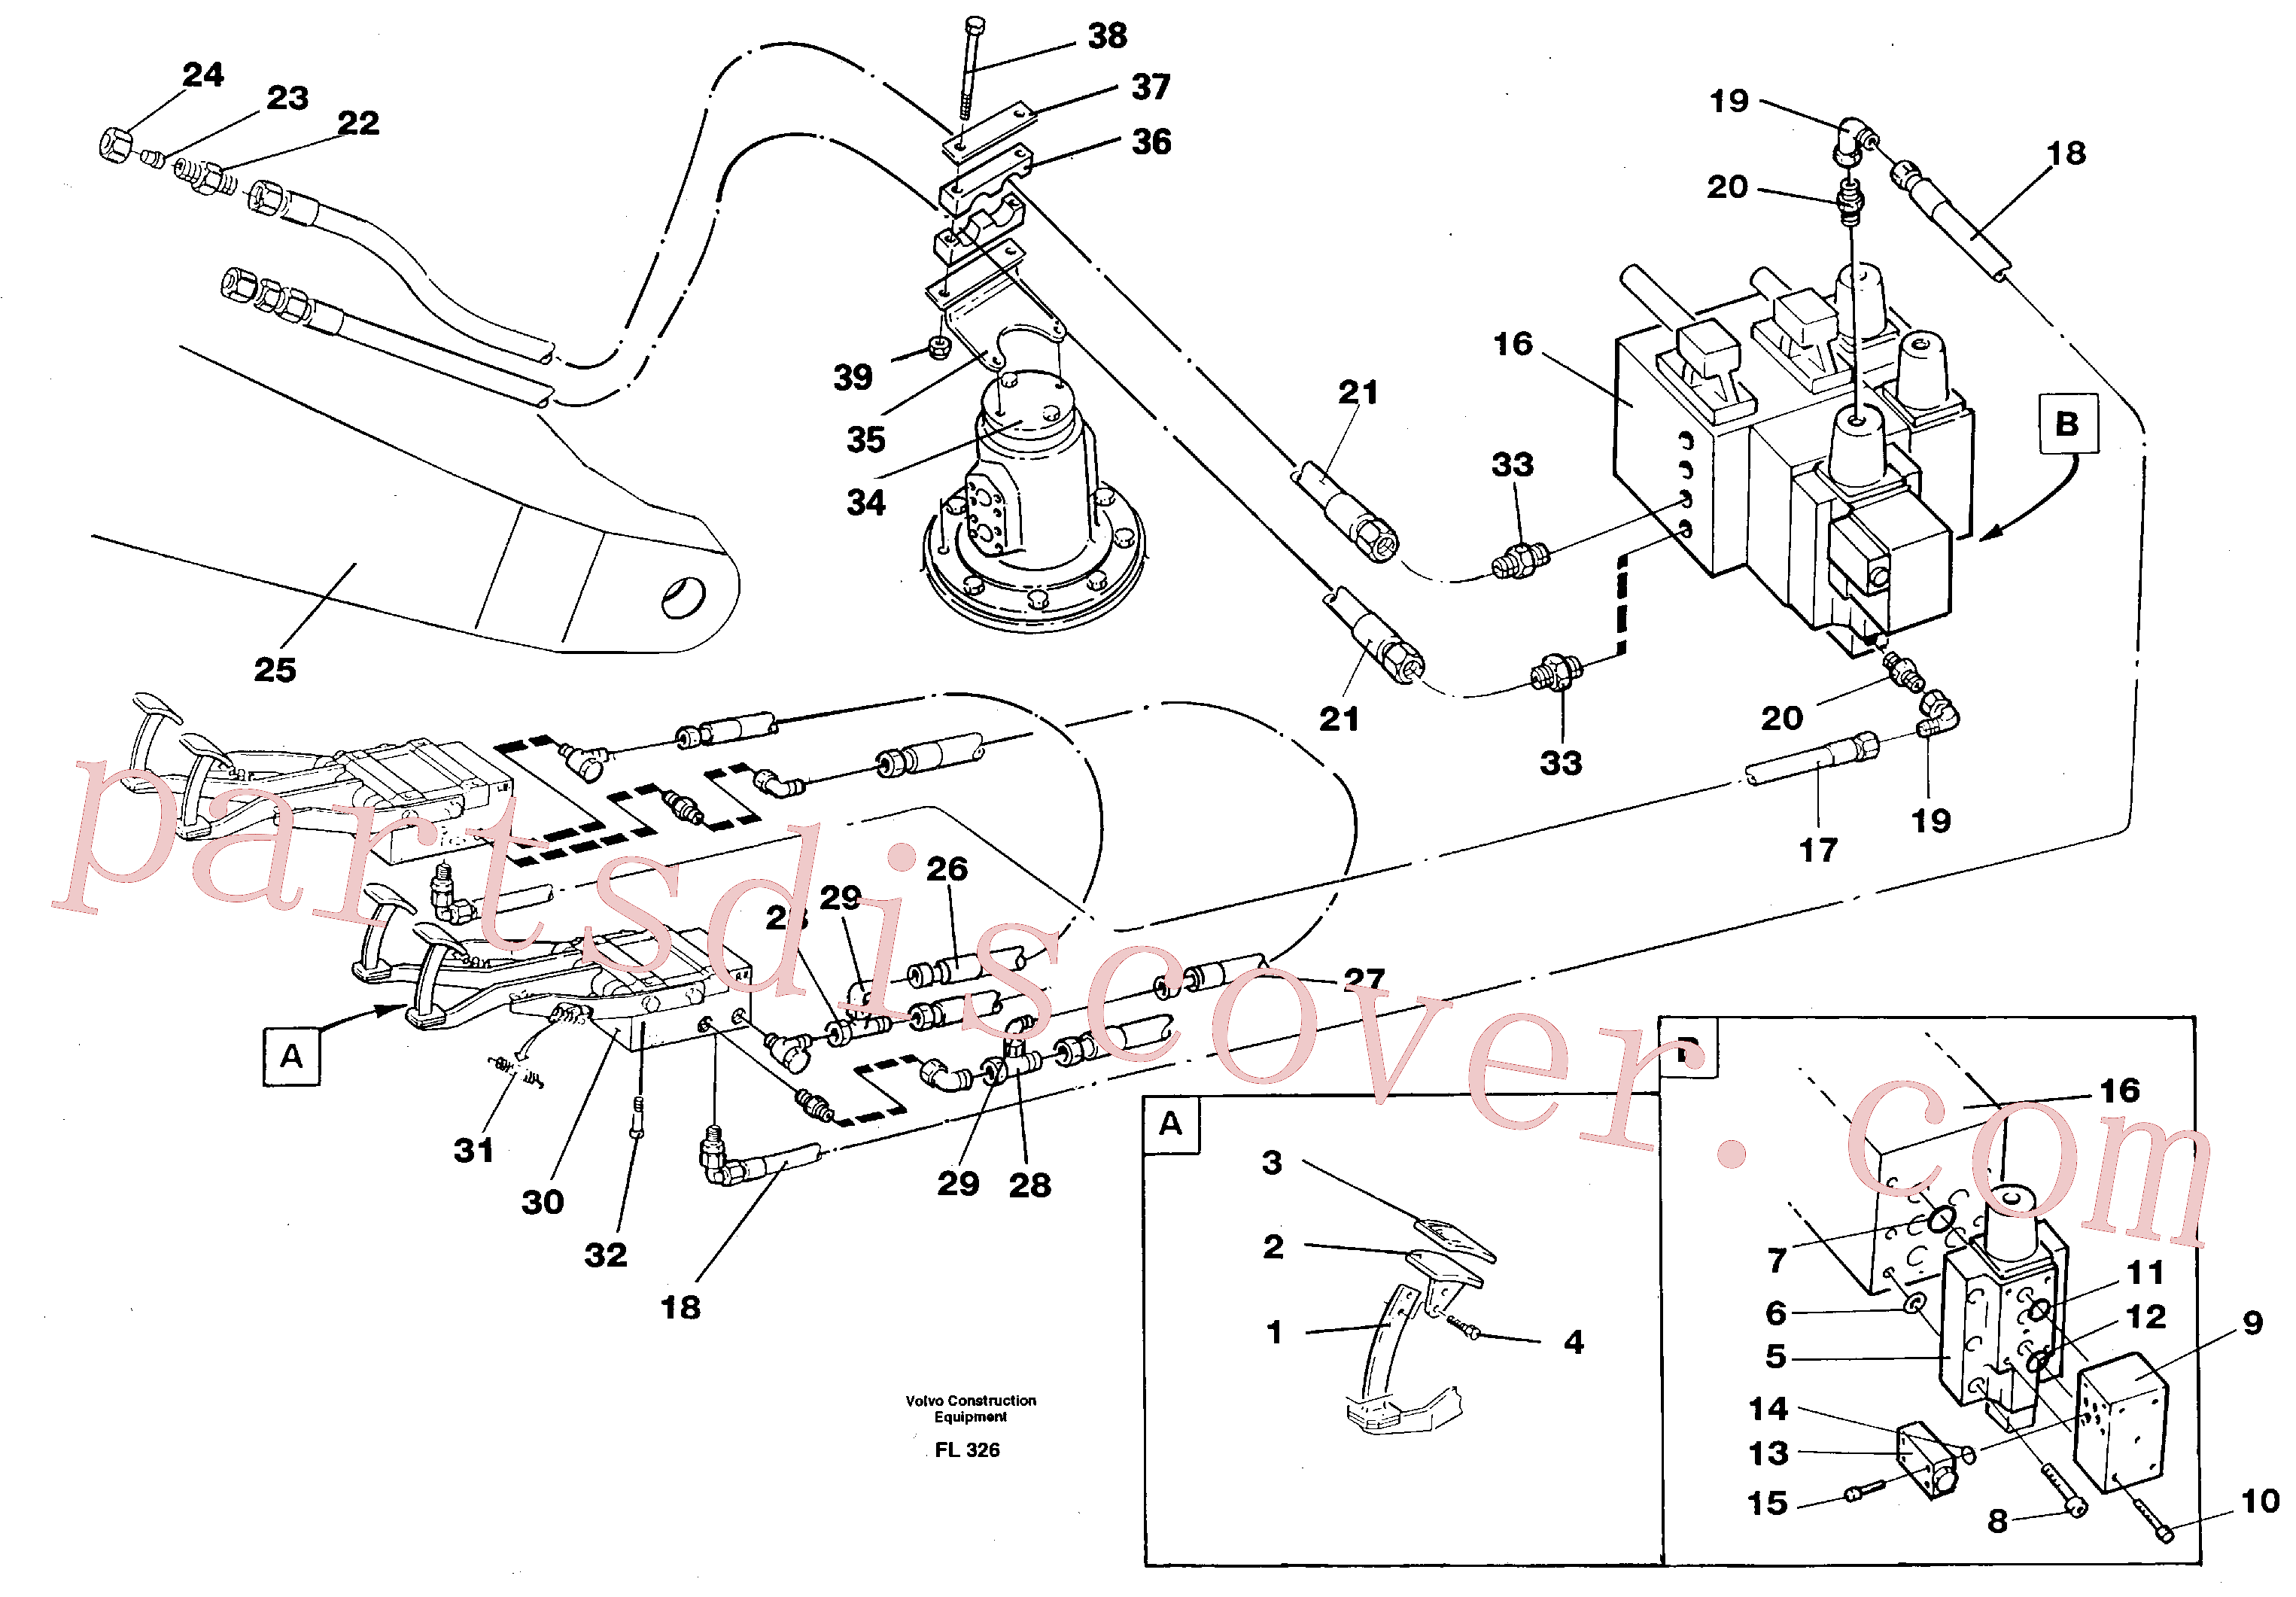 VOE14263249 for Volvo Slope bucket/rotating grab hydraulics in base machine(FL326 assembly)